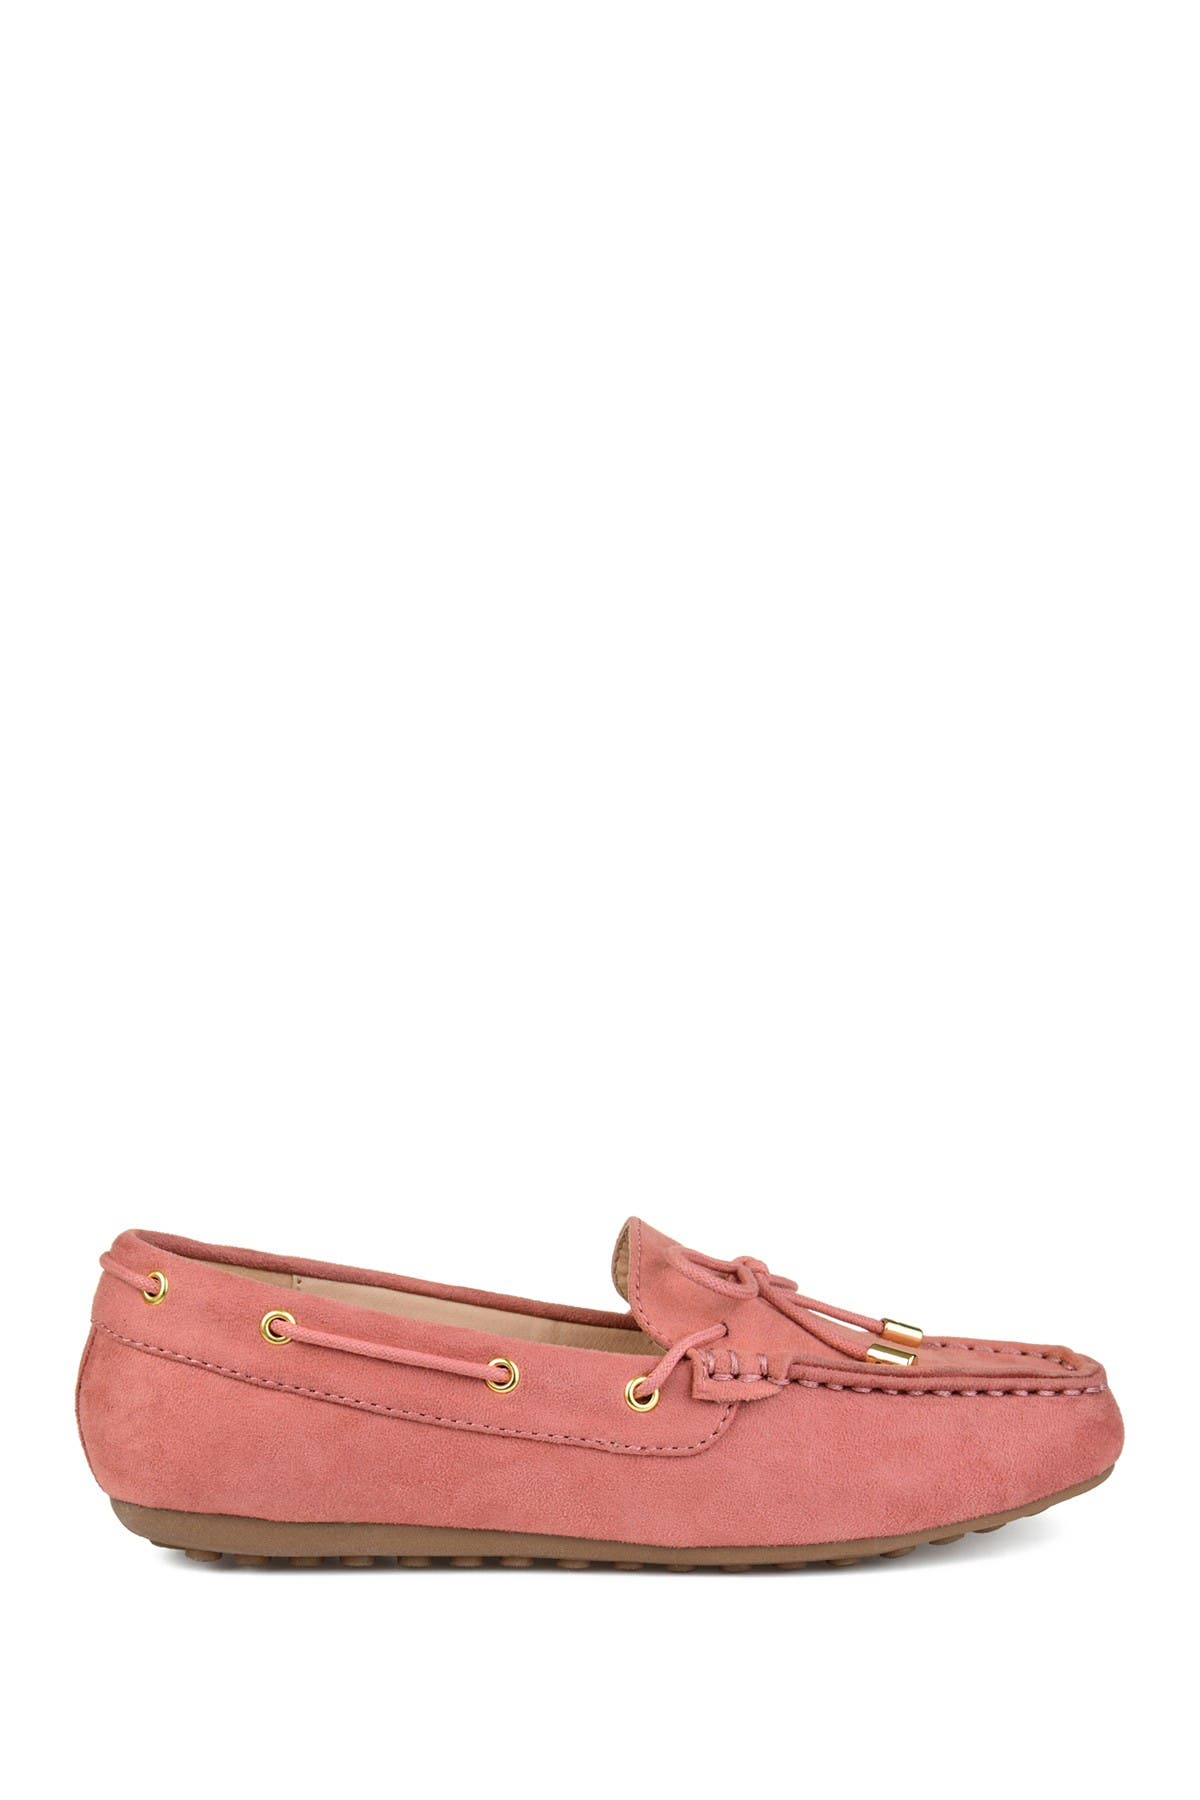 Journee Collection Thatch Slip-on Loafer In Medium Pink8